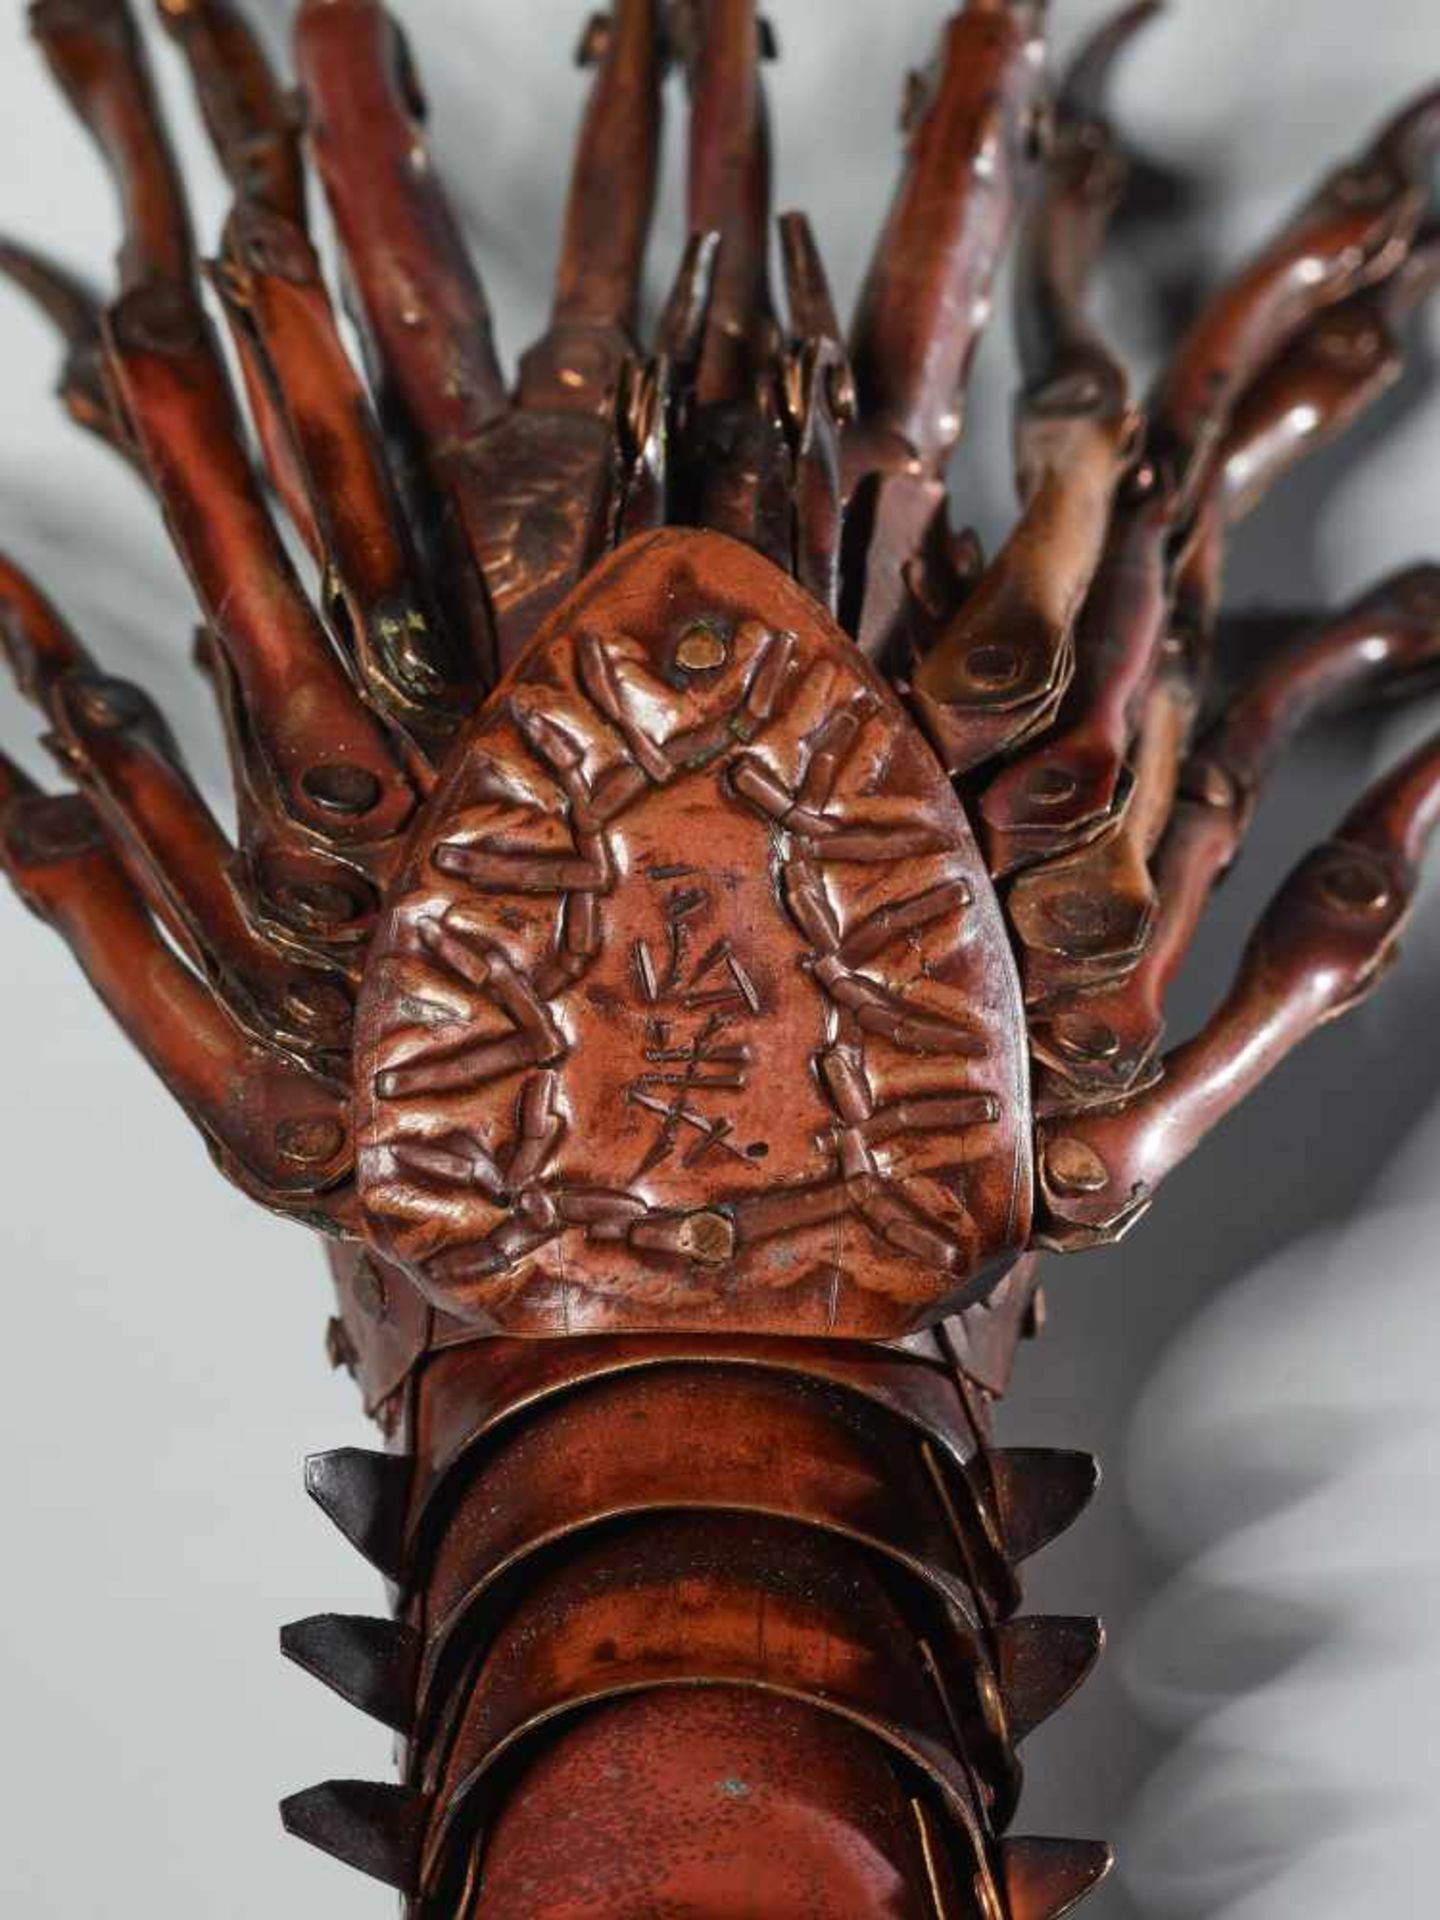 A PAIR OF FULLY ARTICULATED JIZAI OKIMONO DEPICTING EBI (SPINY LOBSTER) BY HIROYOSHICopperJapan, - Image 14 of 15